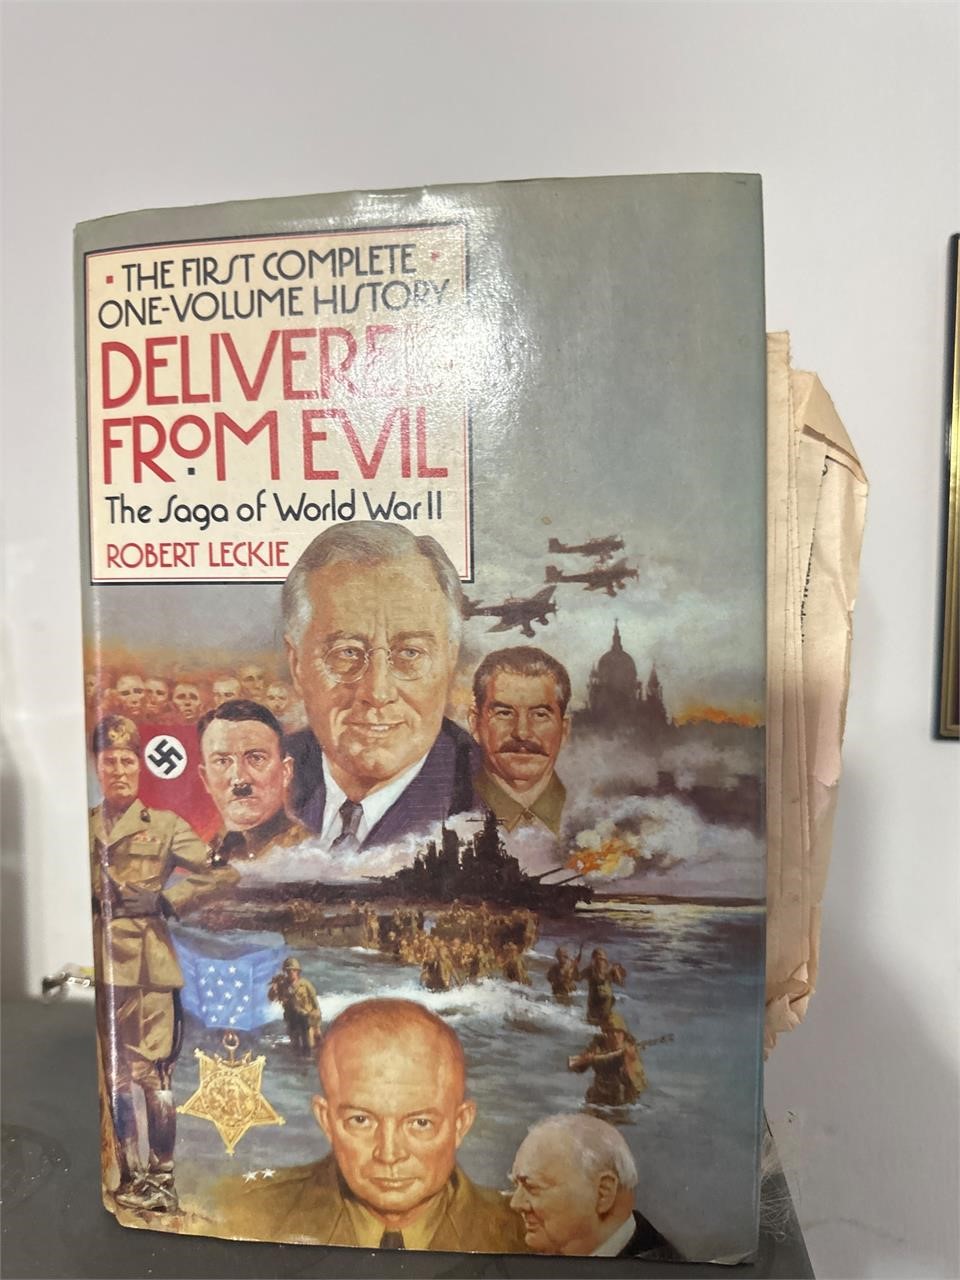 First edition derived from evil ww2 book